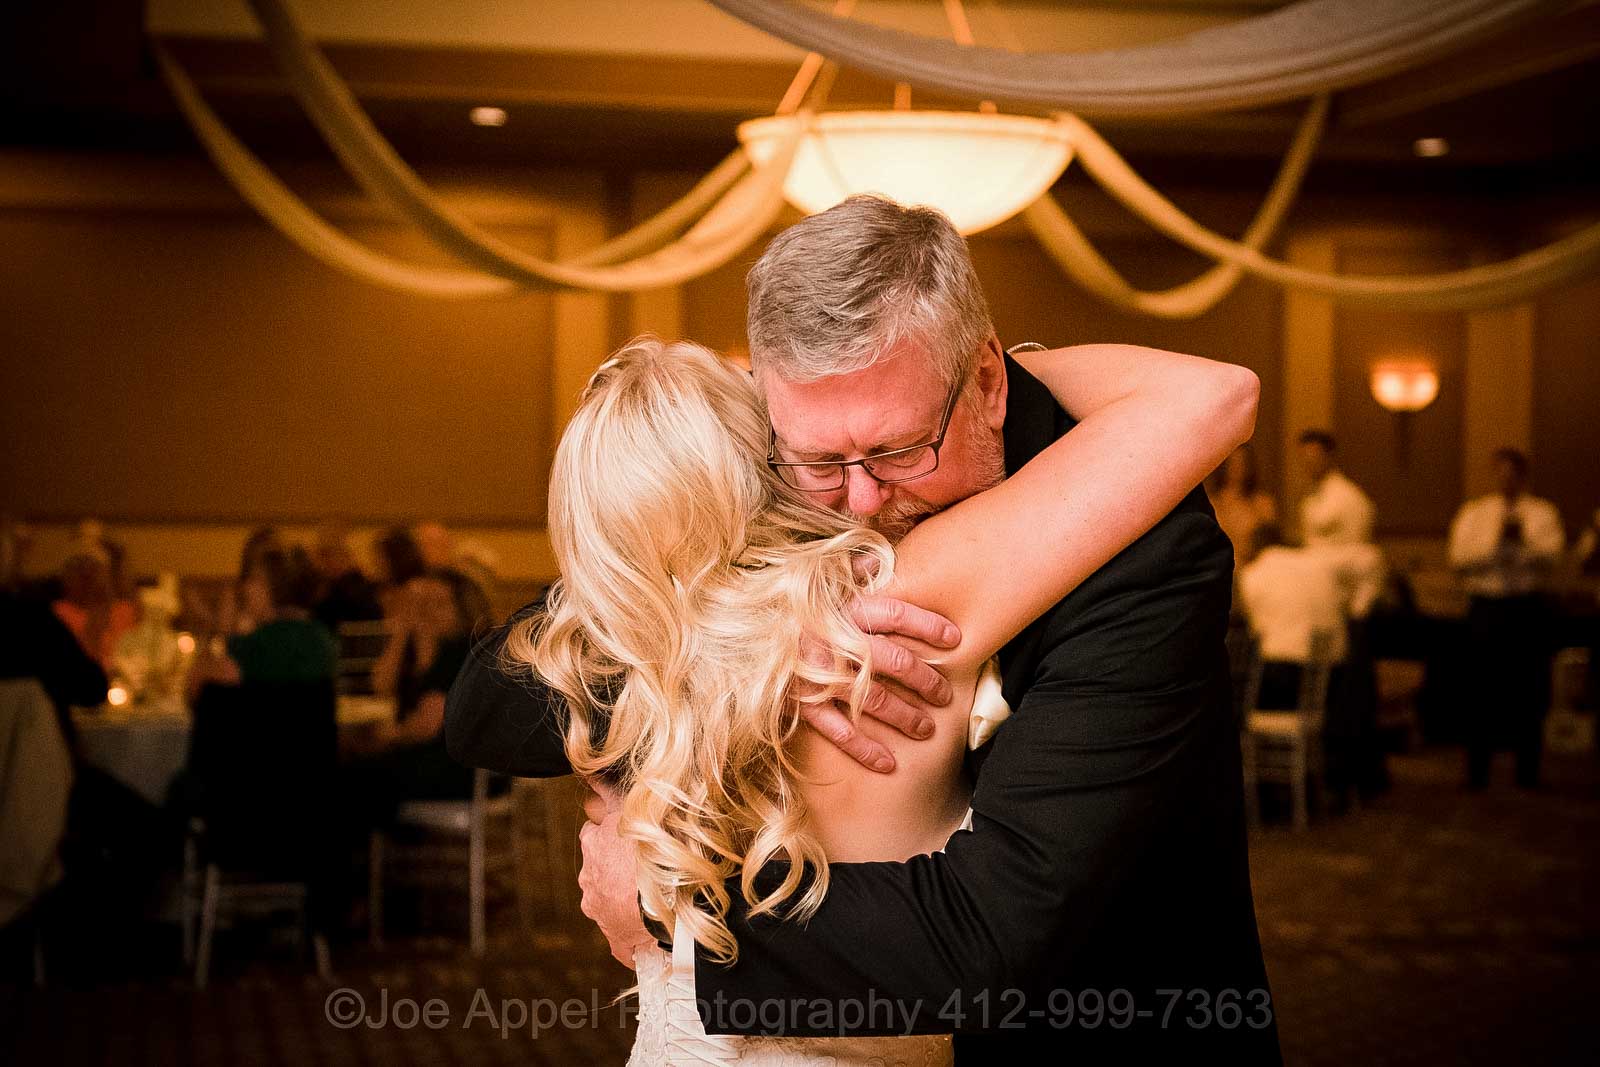 A bride embraces her father as they dance during her wedding reception at the Embassy Suites hotel near Pittsburgh International Airport.